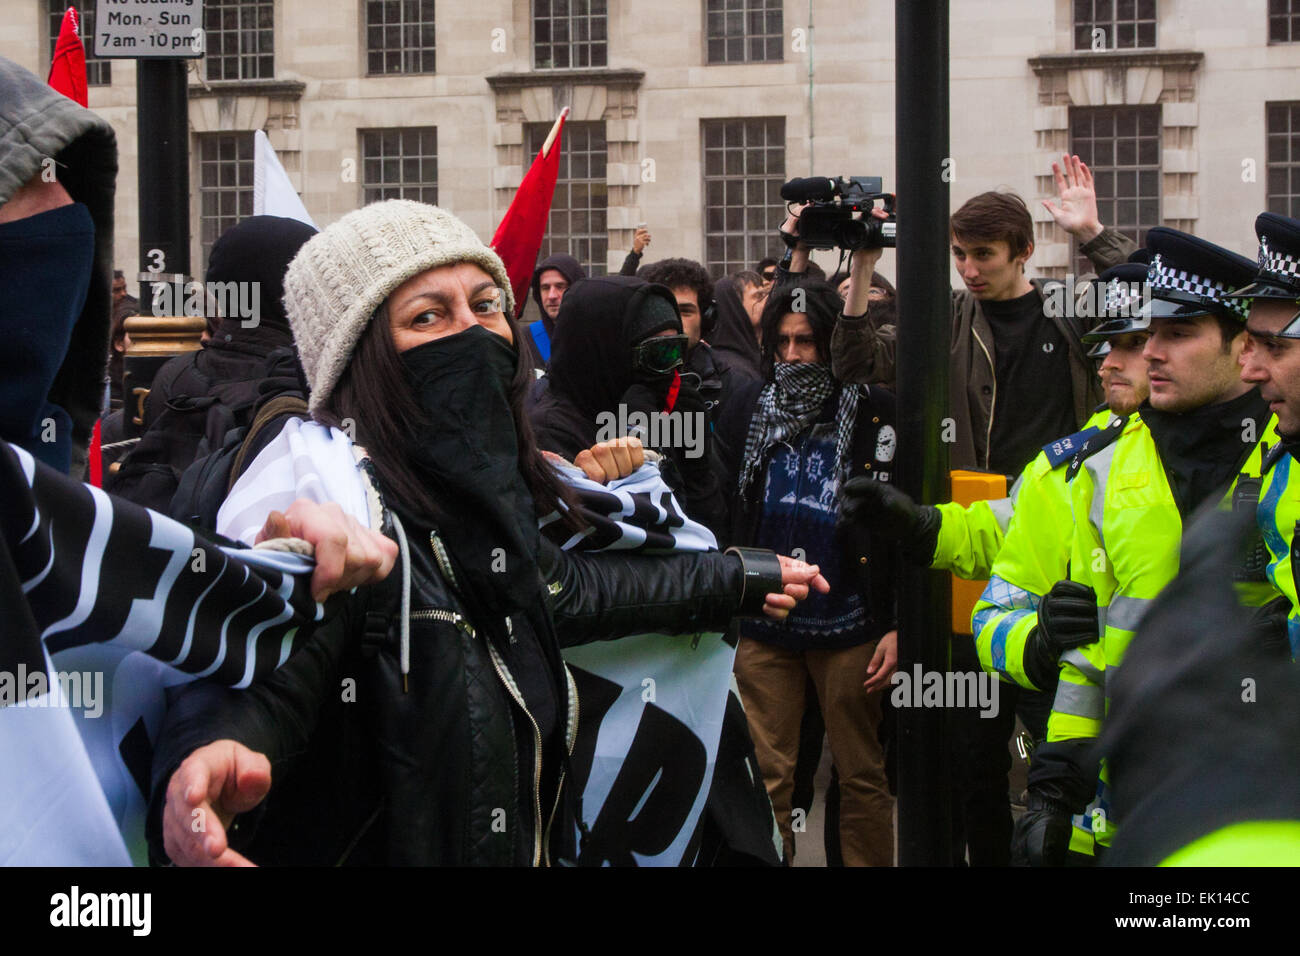 Whitehall, London, April 4th 2015. As PEGIDA UK holds a poorly attended rally on Whitehall, scores of police are called in to contain counter protesters from various London anti-fascist movements. PICTURED: Anti-fascists taunt the police during a stand-off after another failed attempt to reach the PEGIDA rally. Credit:  Paul Davey/Alamy Live News Stock Photo